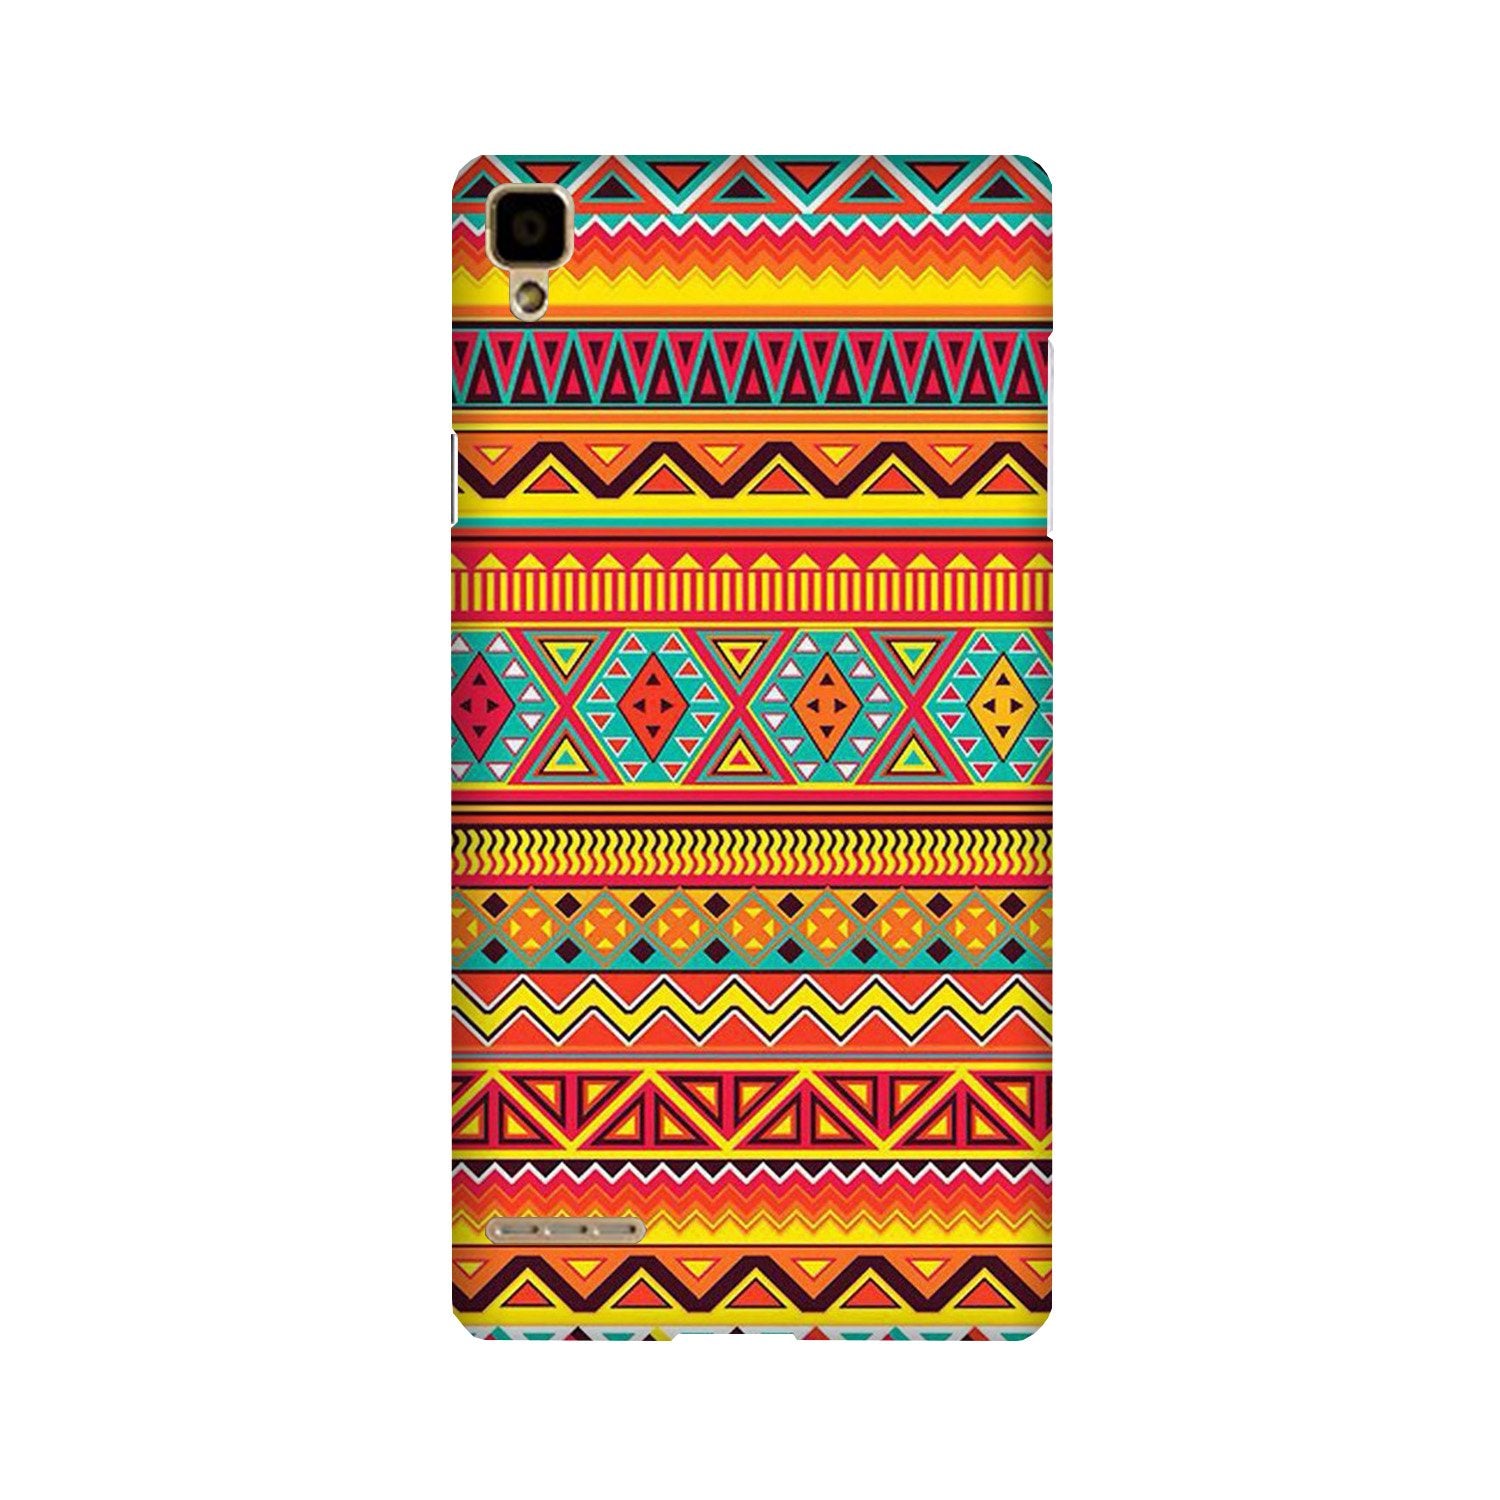 Zigzag line pattern Case for Oppo F1